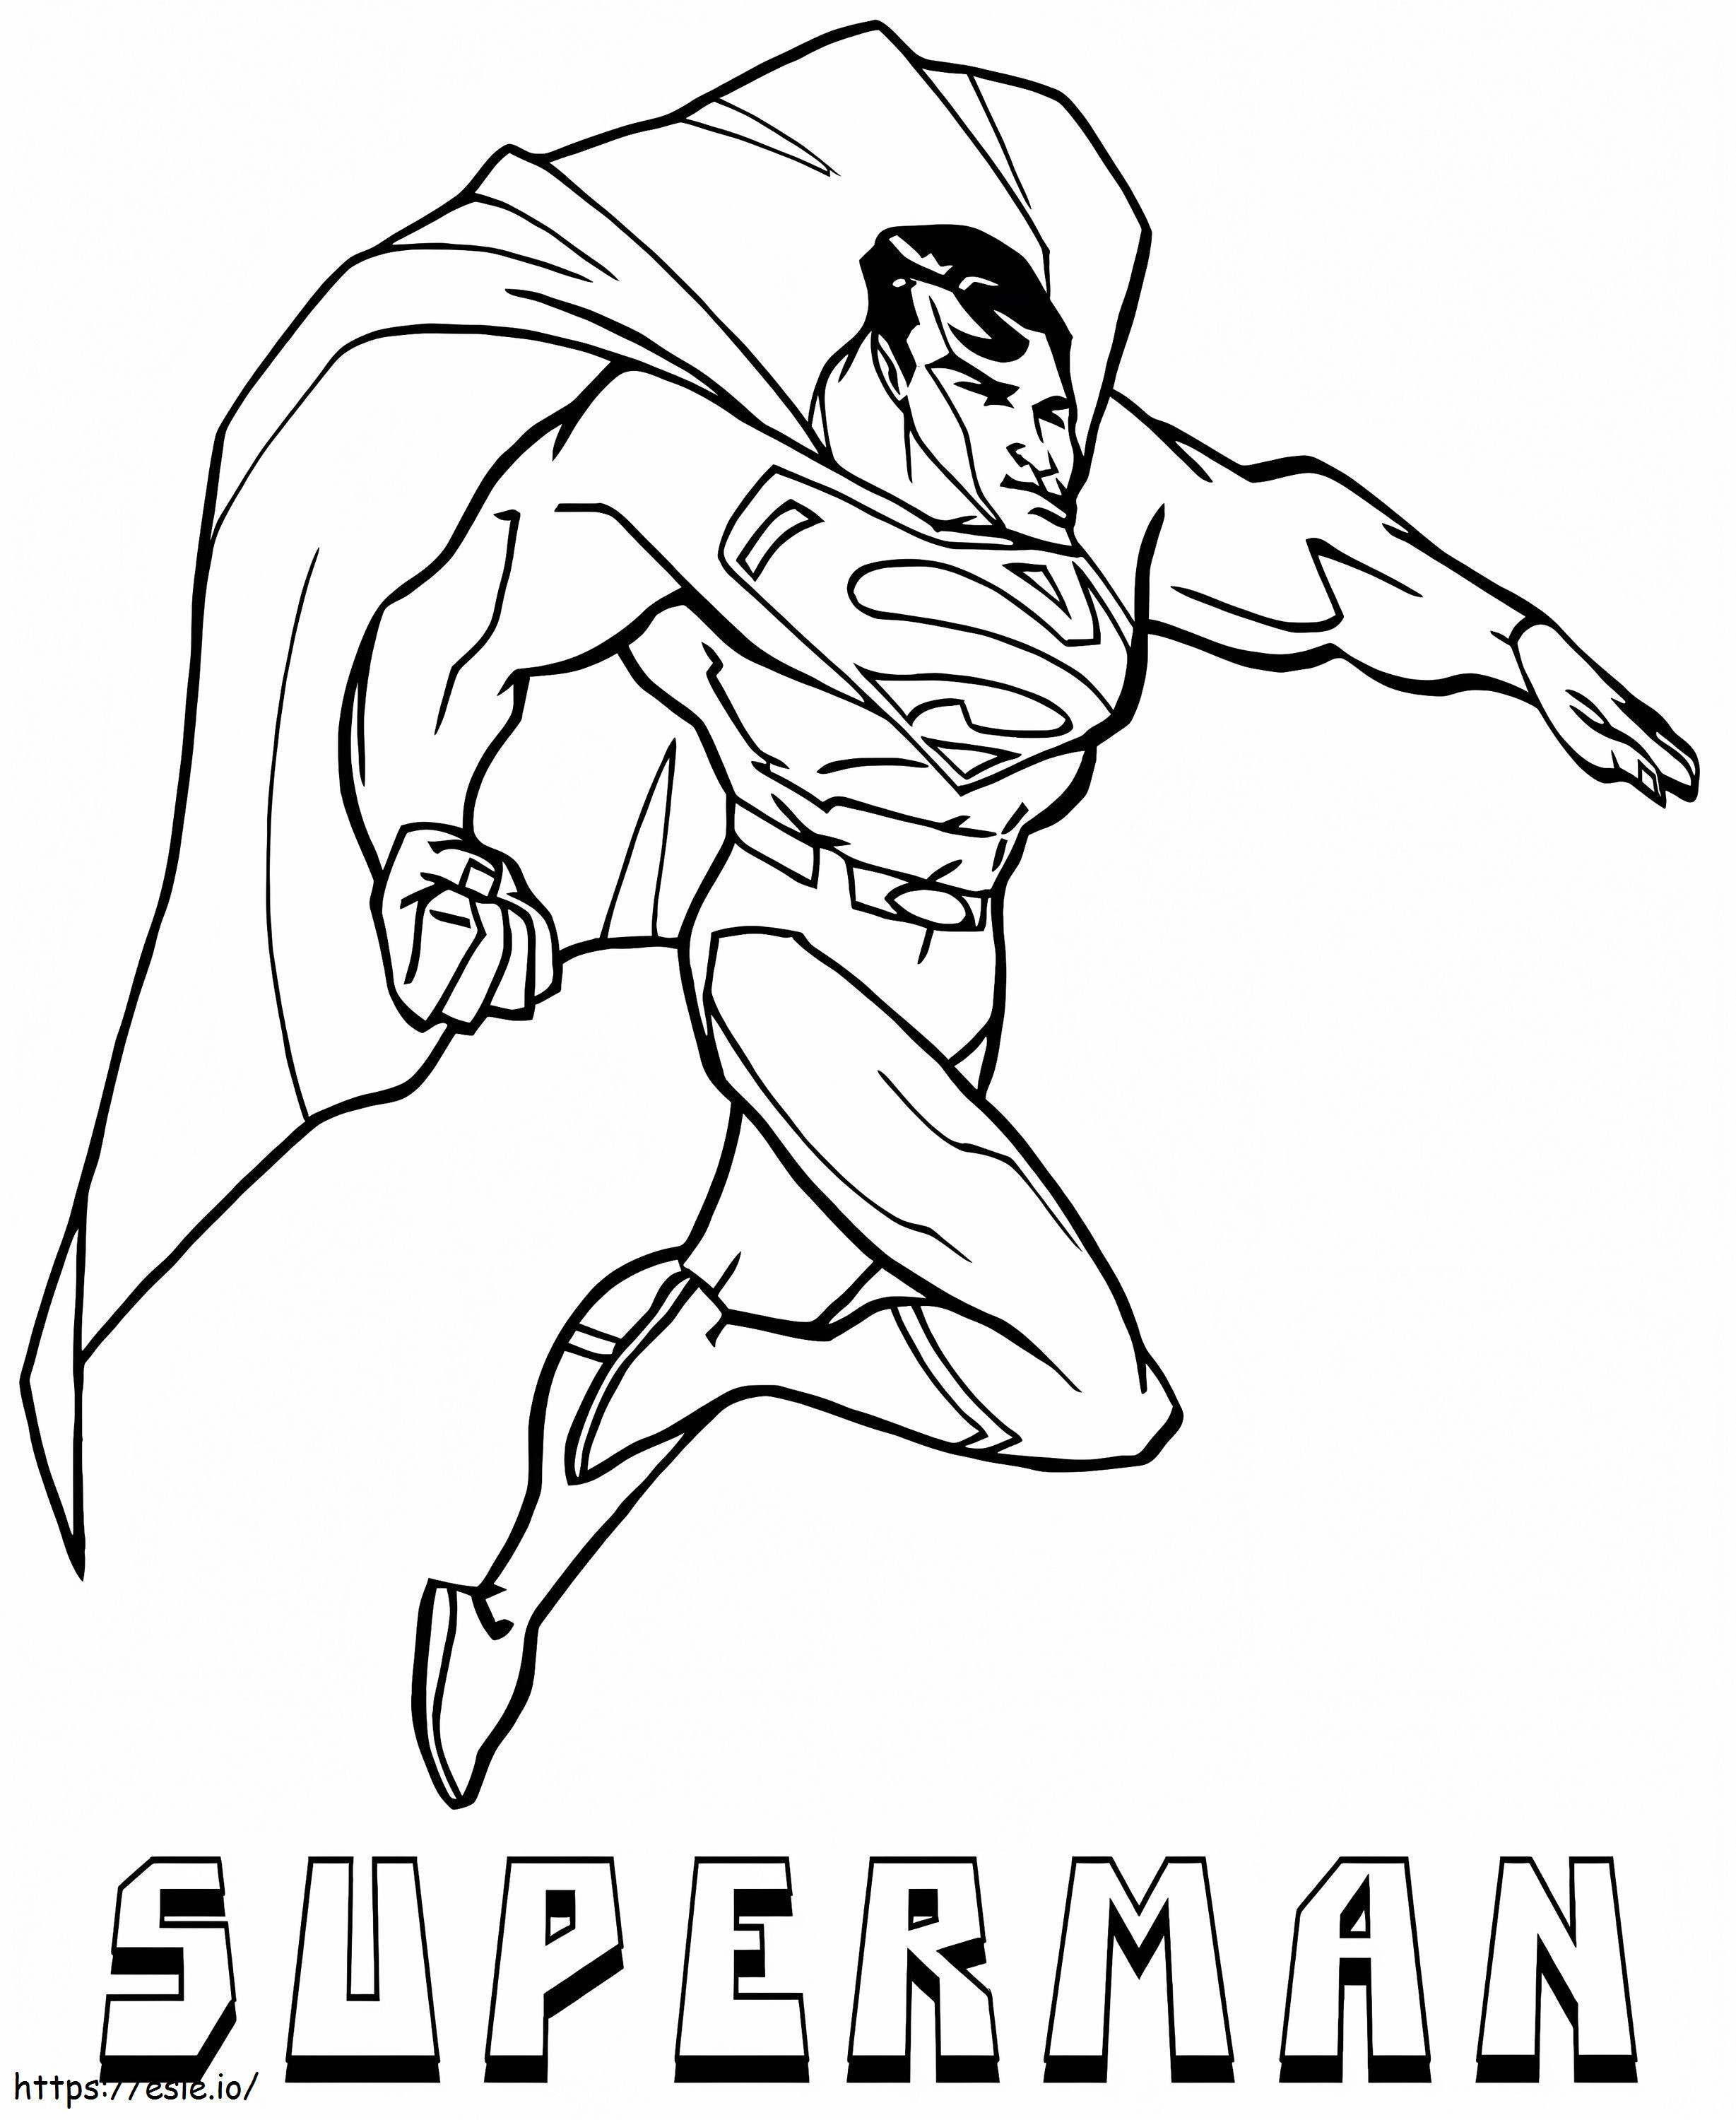 Cool Superman coloring page